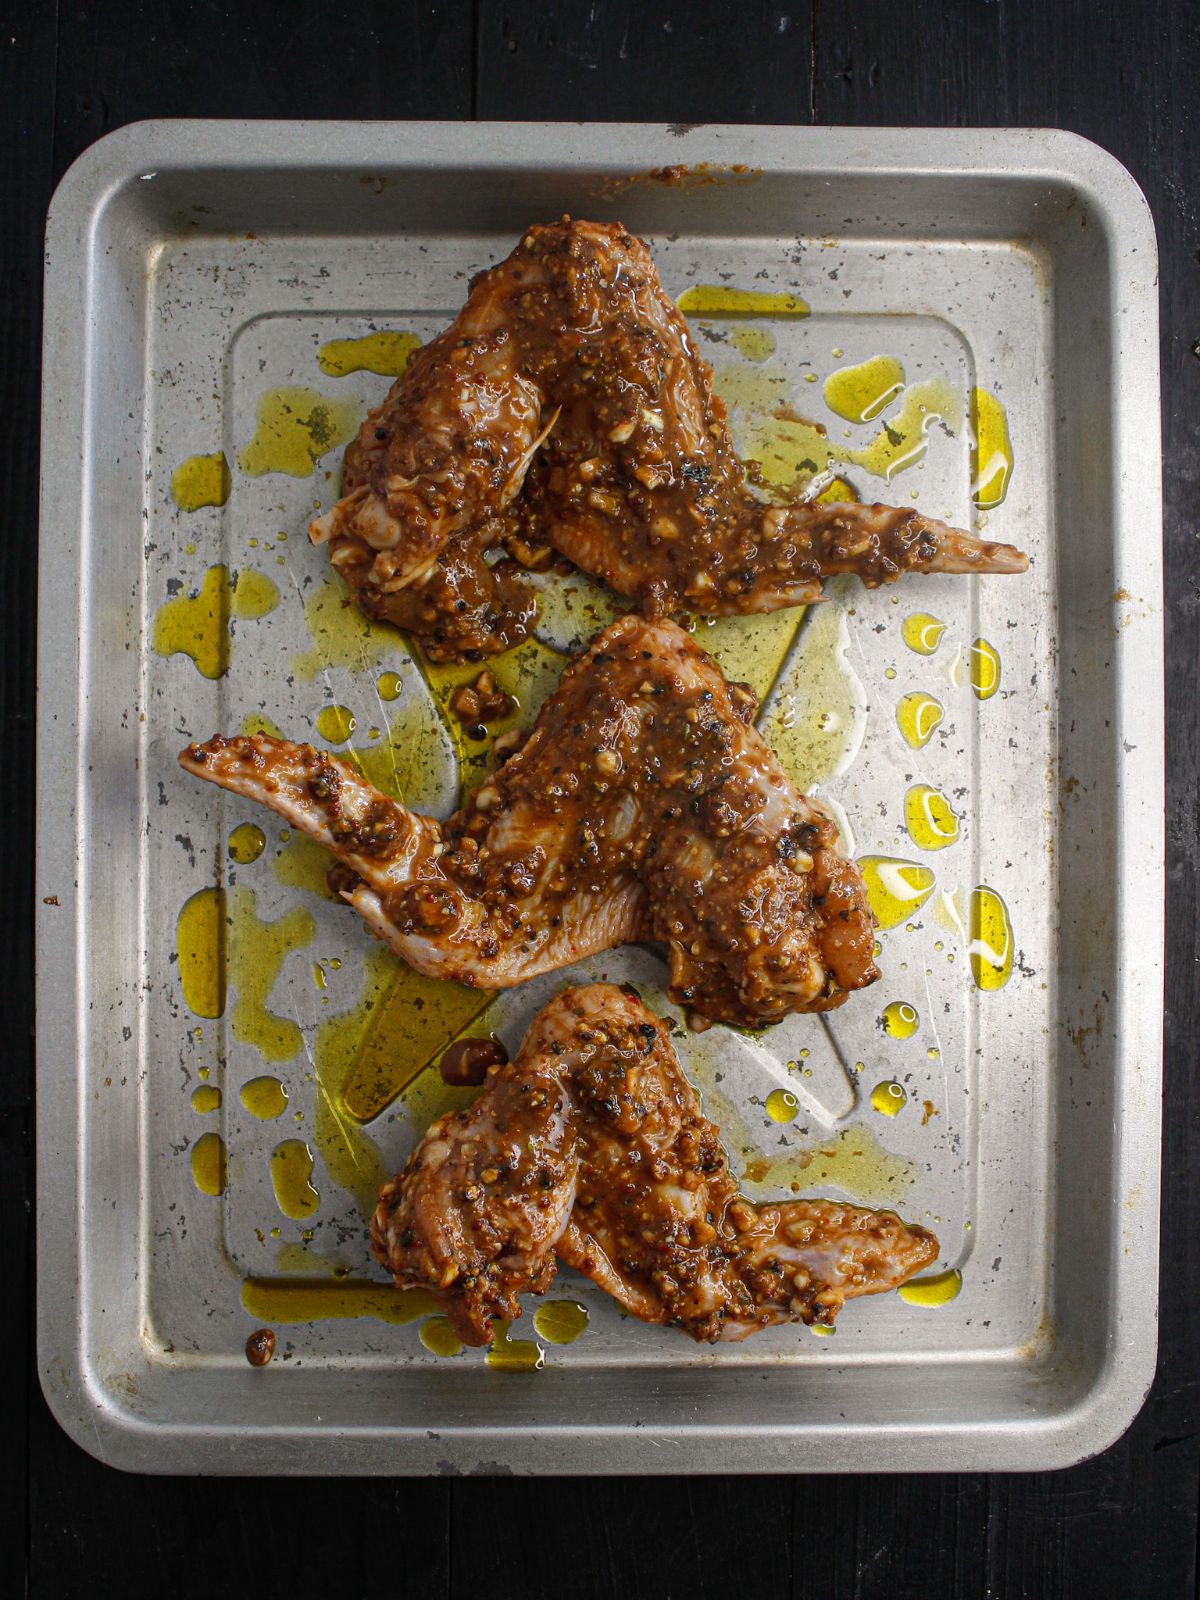 Place the marinated chicken on a baking tray nice brushed with some oil and bake it